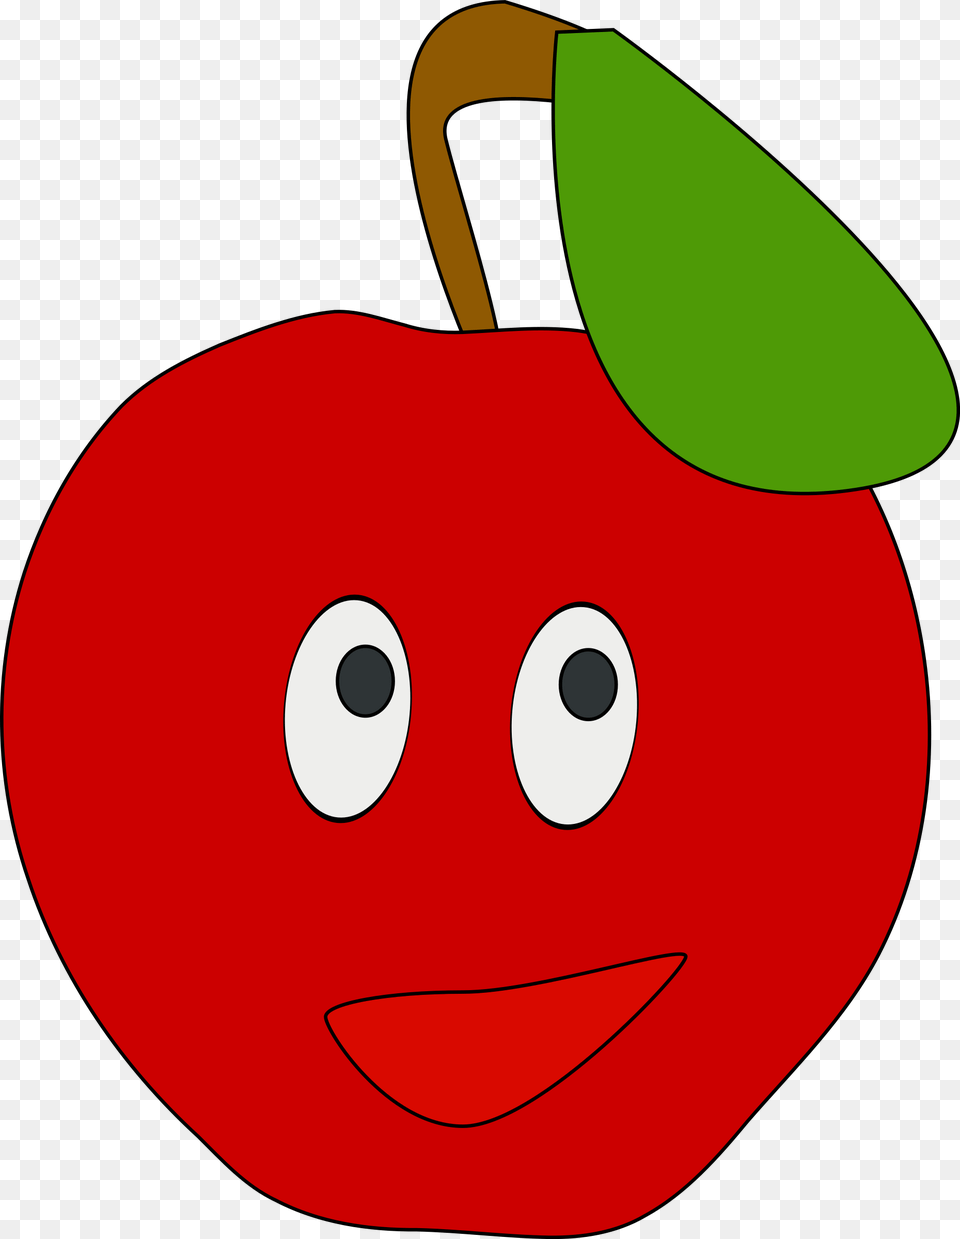 This Free Icons Design Of Smiling Apple, Plant, Food, Fruit, Produce Png Image